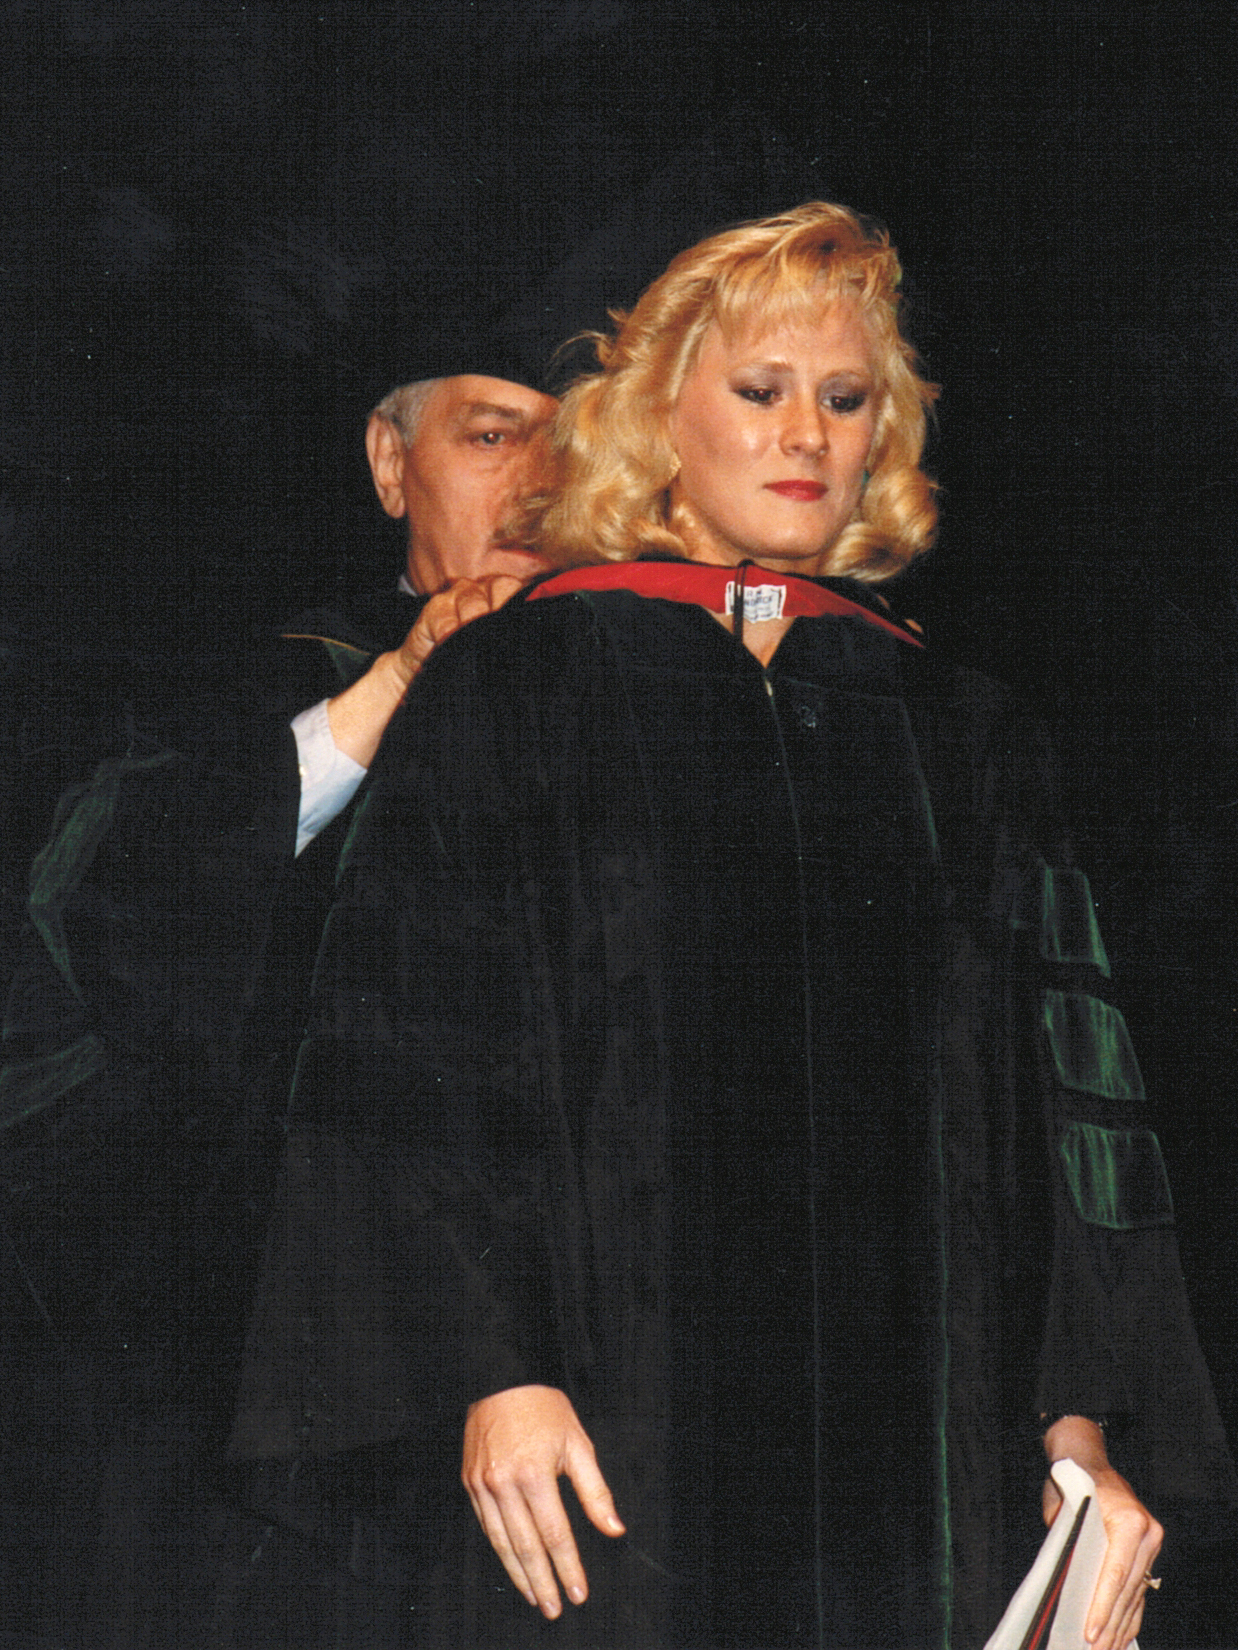 Dr. Toni Bertolet is hooded by Dr. Carl Evers after she received her Doctor of Medicine diploma in 1988.